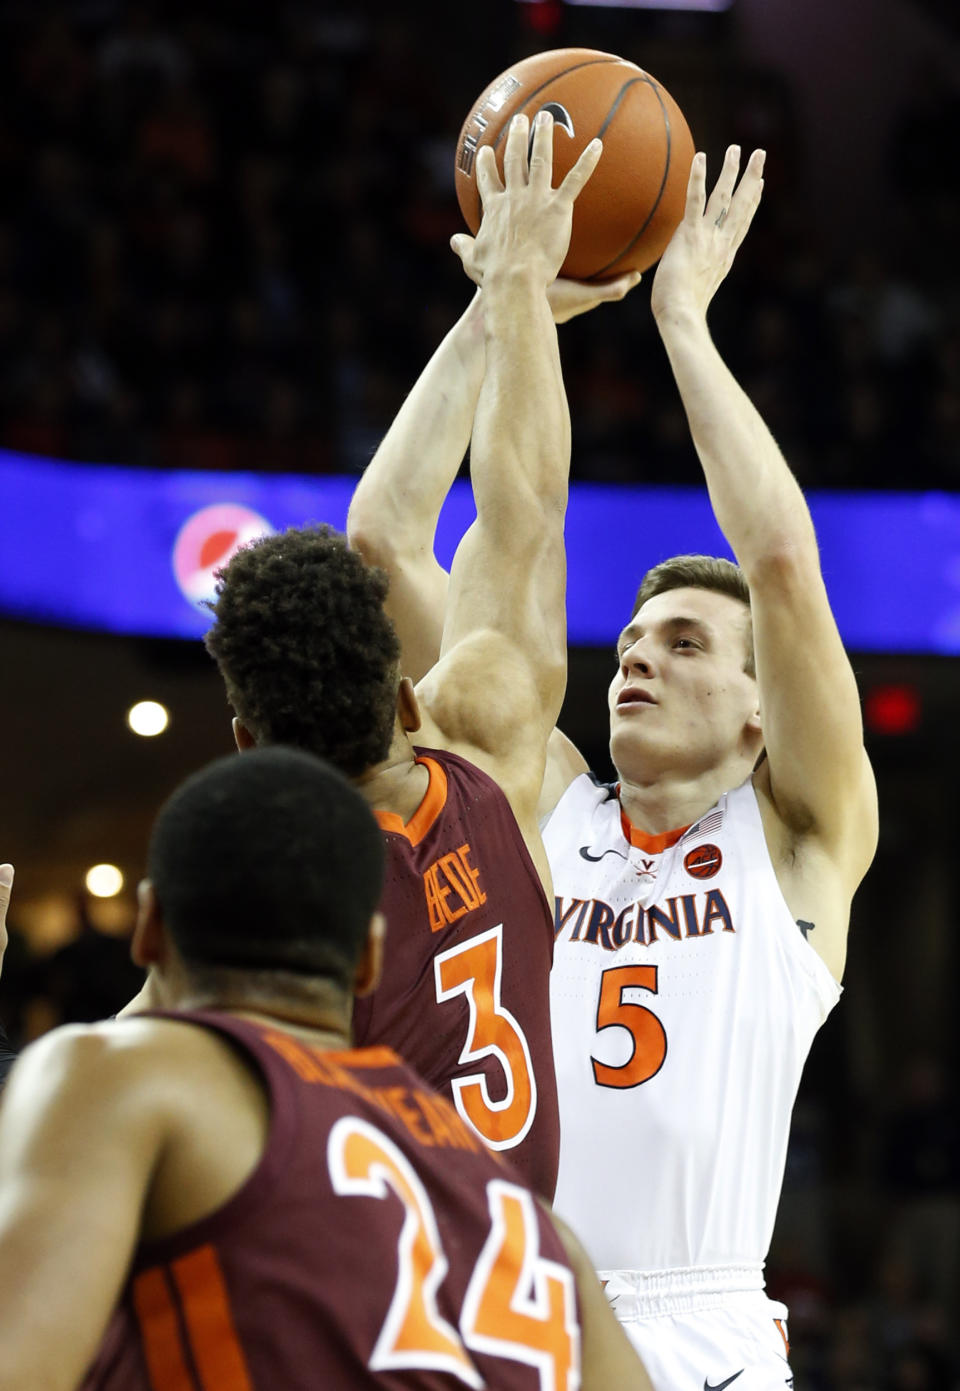 Virginia guard Kyle Guy (5) takes a shot over Virginia Tech guard Wabissa Bede (3) during the first half of an NCAA college basketball game in Charlottesville, Va., Tuesday, Jan. 15, 2019. (AP Photo/Steve Helber)